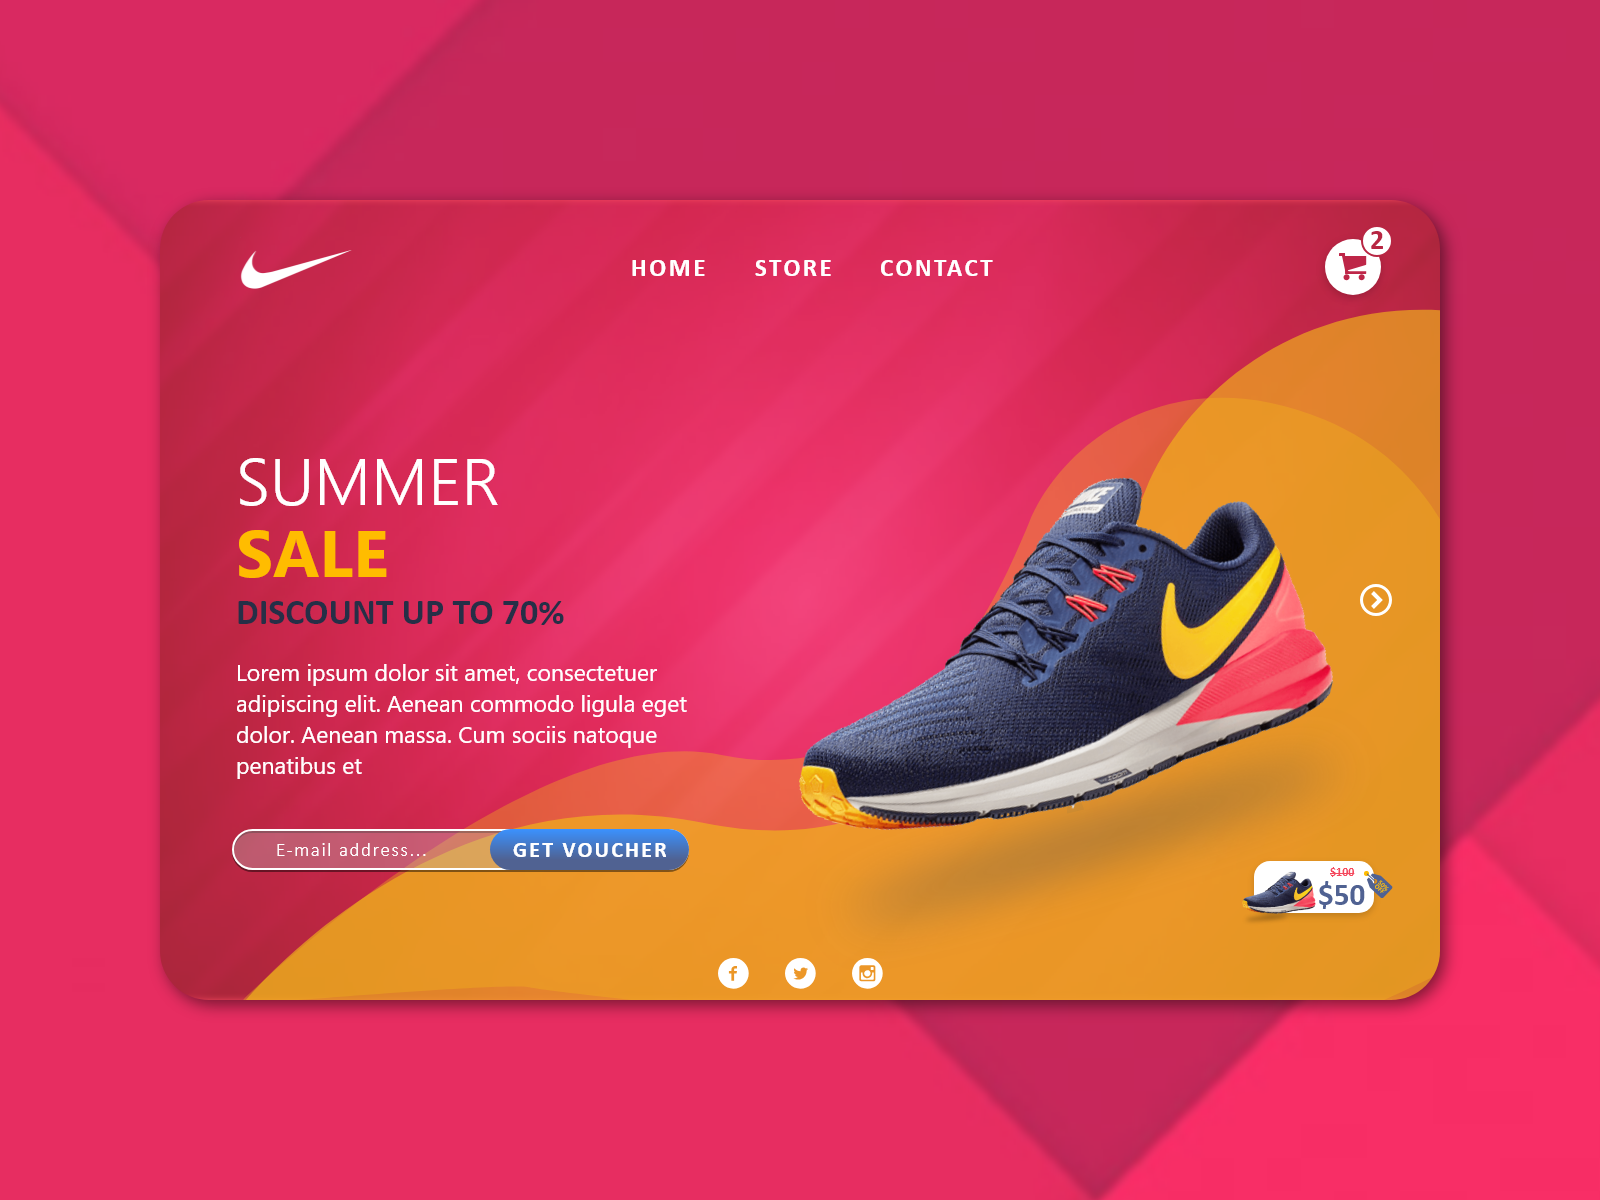 Nike Summer Sale landing page design by Rifat on Dribbble